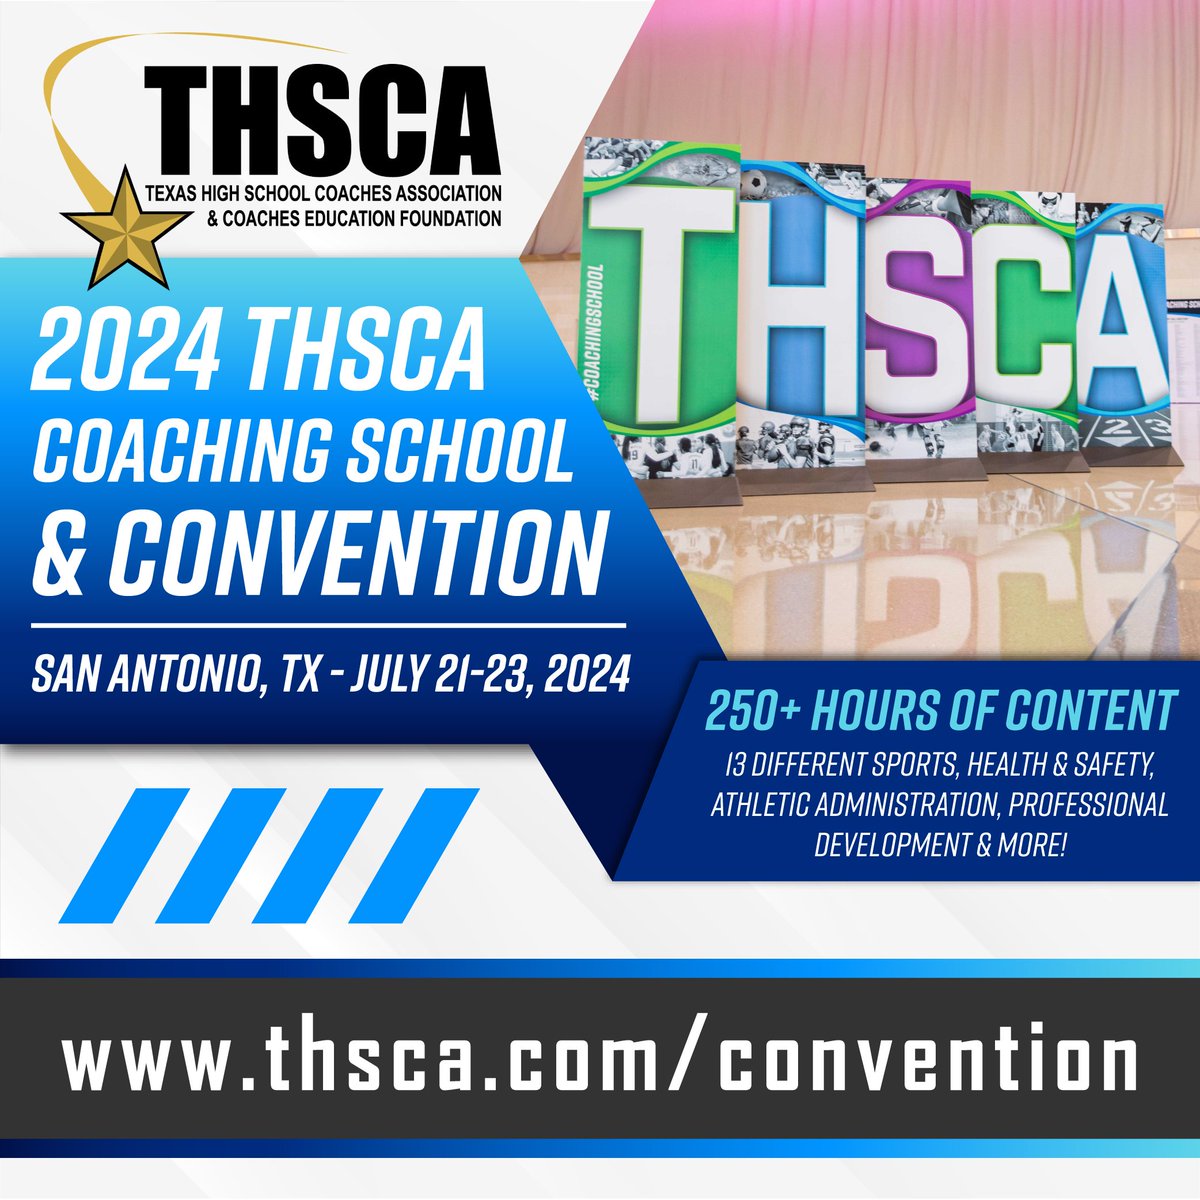 ⭐ It's that time of year again... the 2024 THSCA Coaching School & Convention is just around the corner!🙌 Join us in San Antonio for 250+ hours of content on 13 different sports! Register TODAY and receive the $60 early bird rate! 🔗 thsca.com/convention 📅 July 21-23, 24